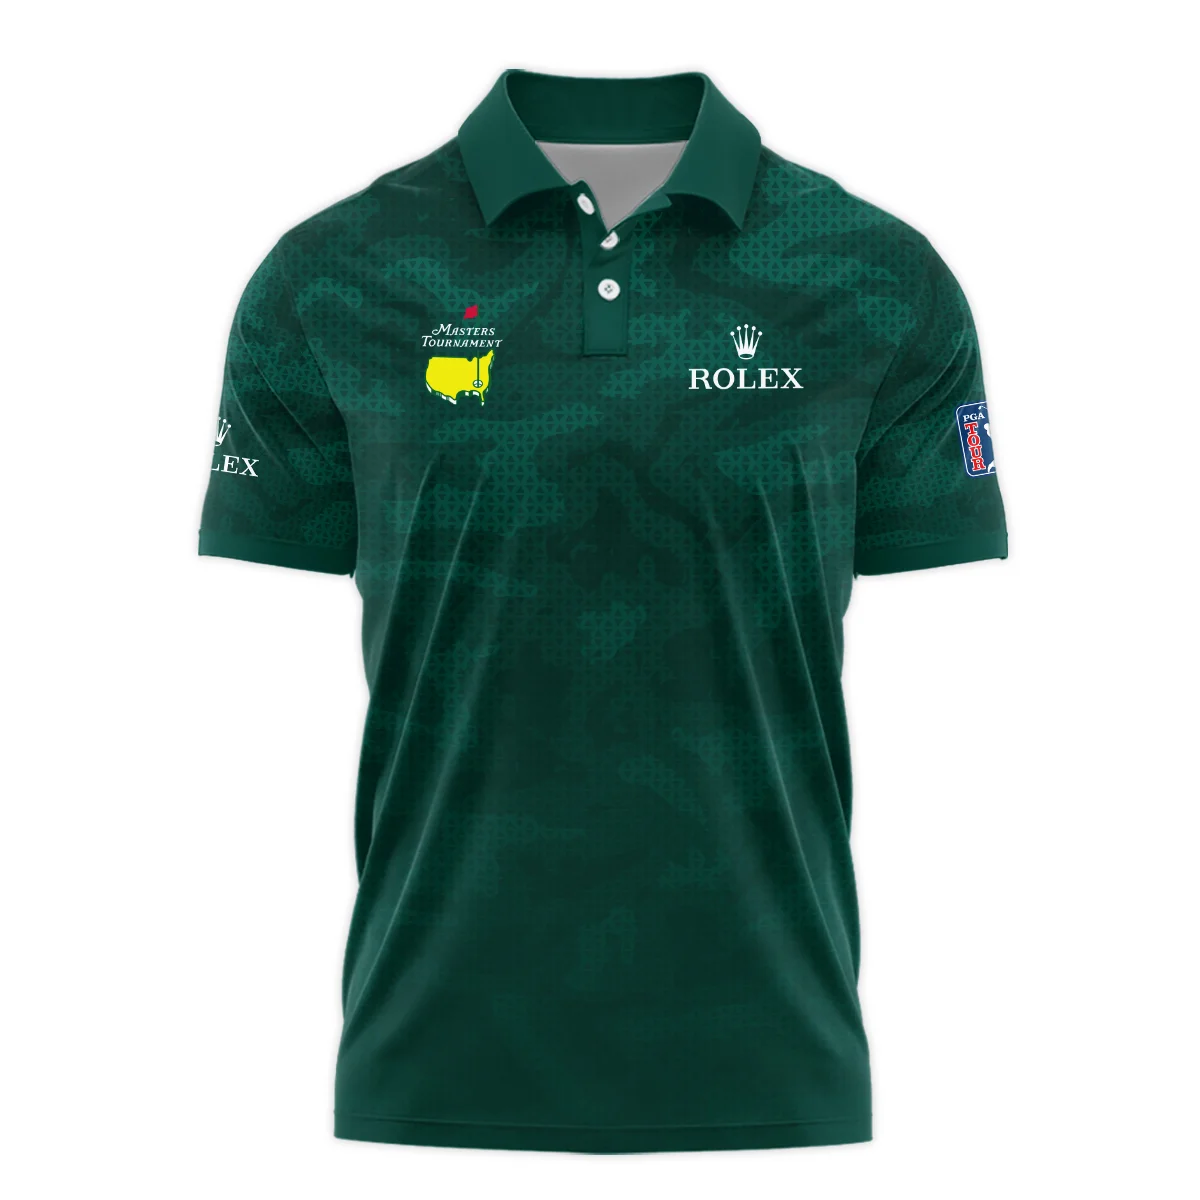 Masters Tournament Rolex Camo Sport Green Abstract Vneck Polo Shirt Style Classic Polo Shirt For Men